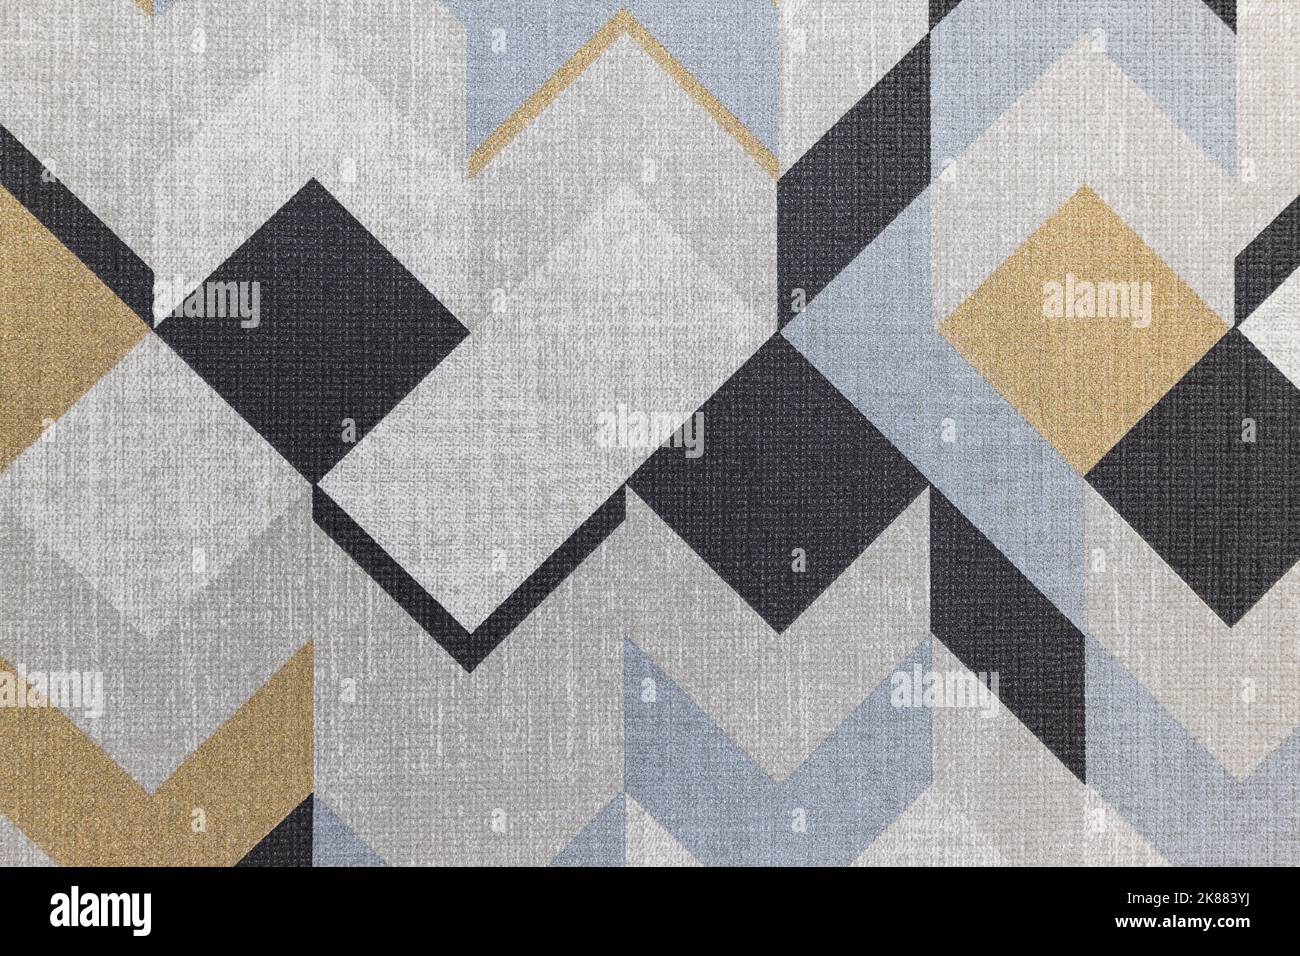 Wallcovering background with geometric design and dynamic gridwork, and angles patterns Stock Photo